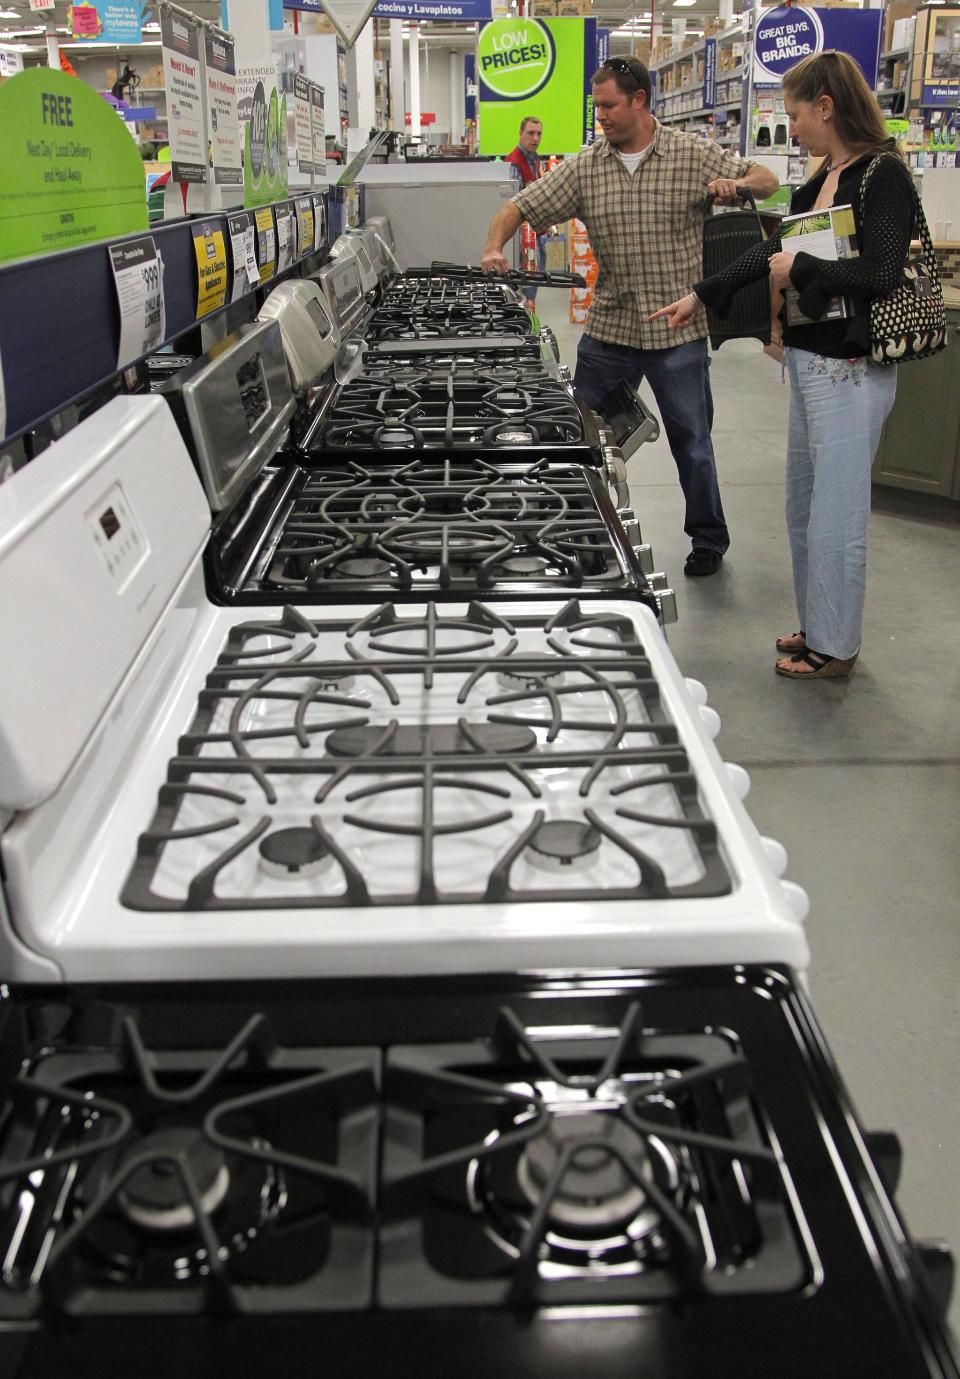 In this Monday, Sept. 10, 2012 photo Brian Gibson, center, and his wife Elizabeth Gibson, right, both of Framingham, Mass., examine stoves at a Lowe's store location in Framingham. U.S. companies remained cautious in September and held back on orders for long-lasting manufactured goods that signal investment plans. (AP Photo/Steven Senne)